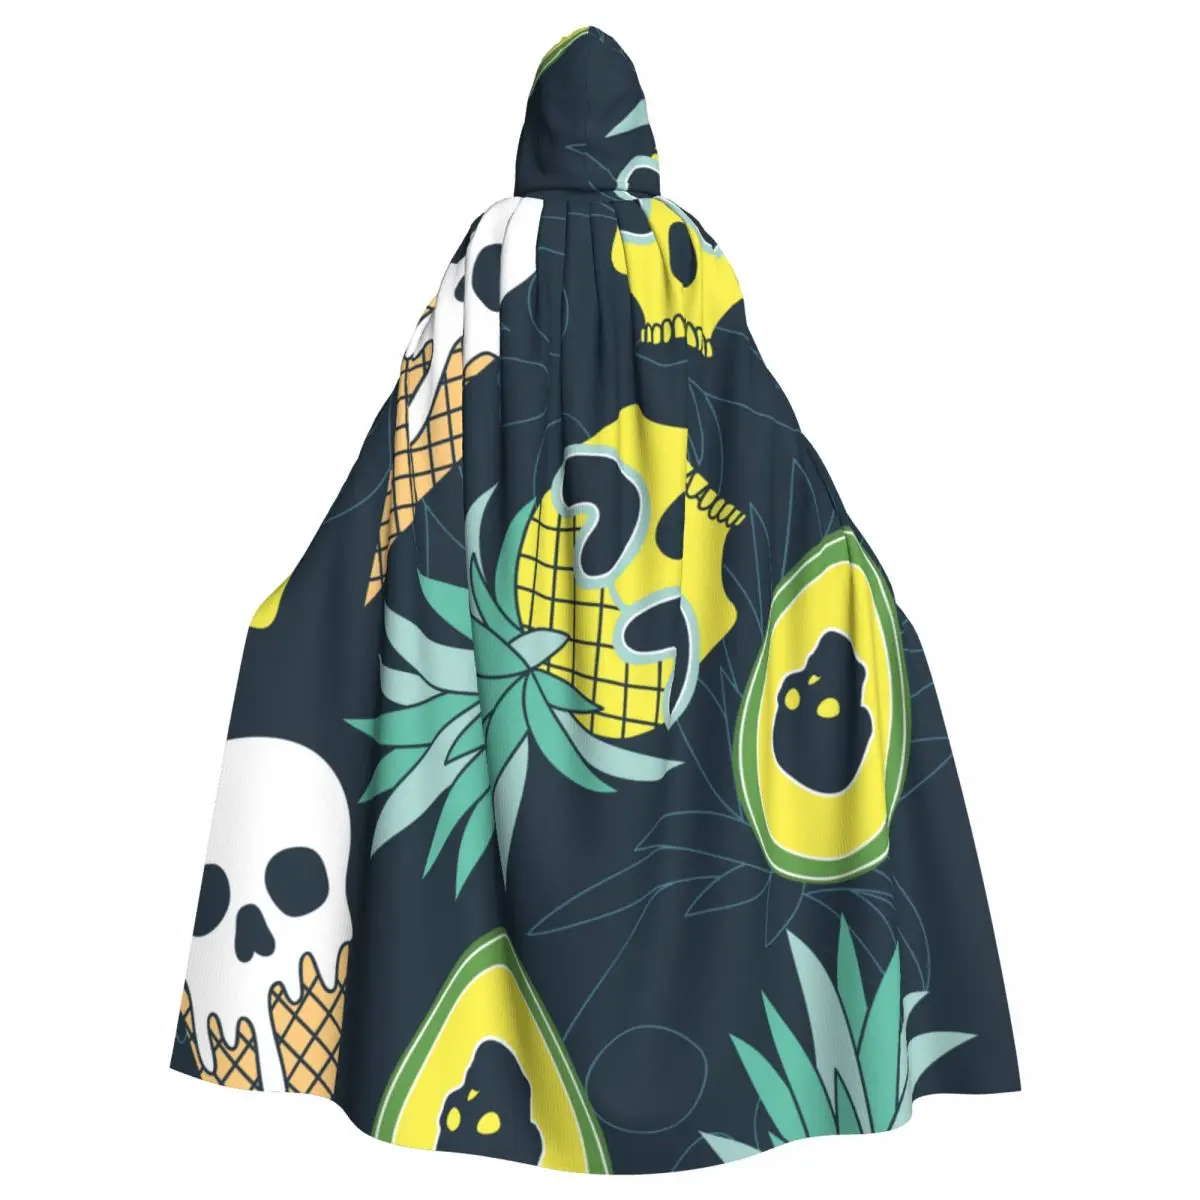 

Unisex Adult Summer Skull Of Hilarious Pineapple Ice Cream Avocado Cloak with Hood Long Witch Costume Cosplay